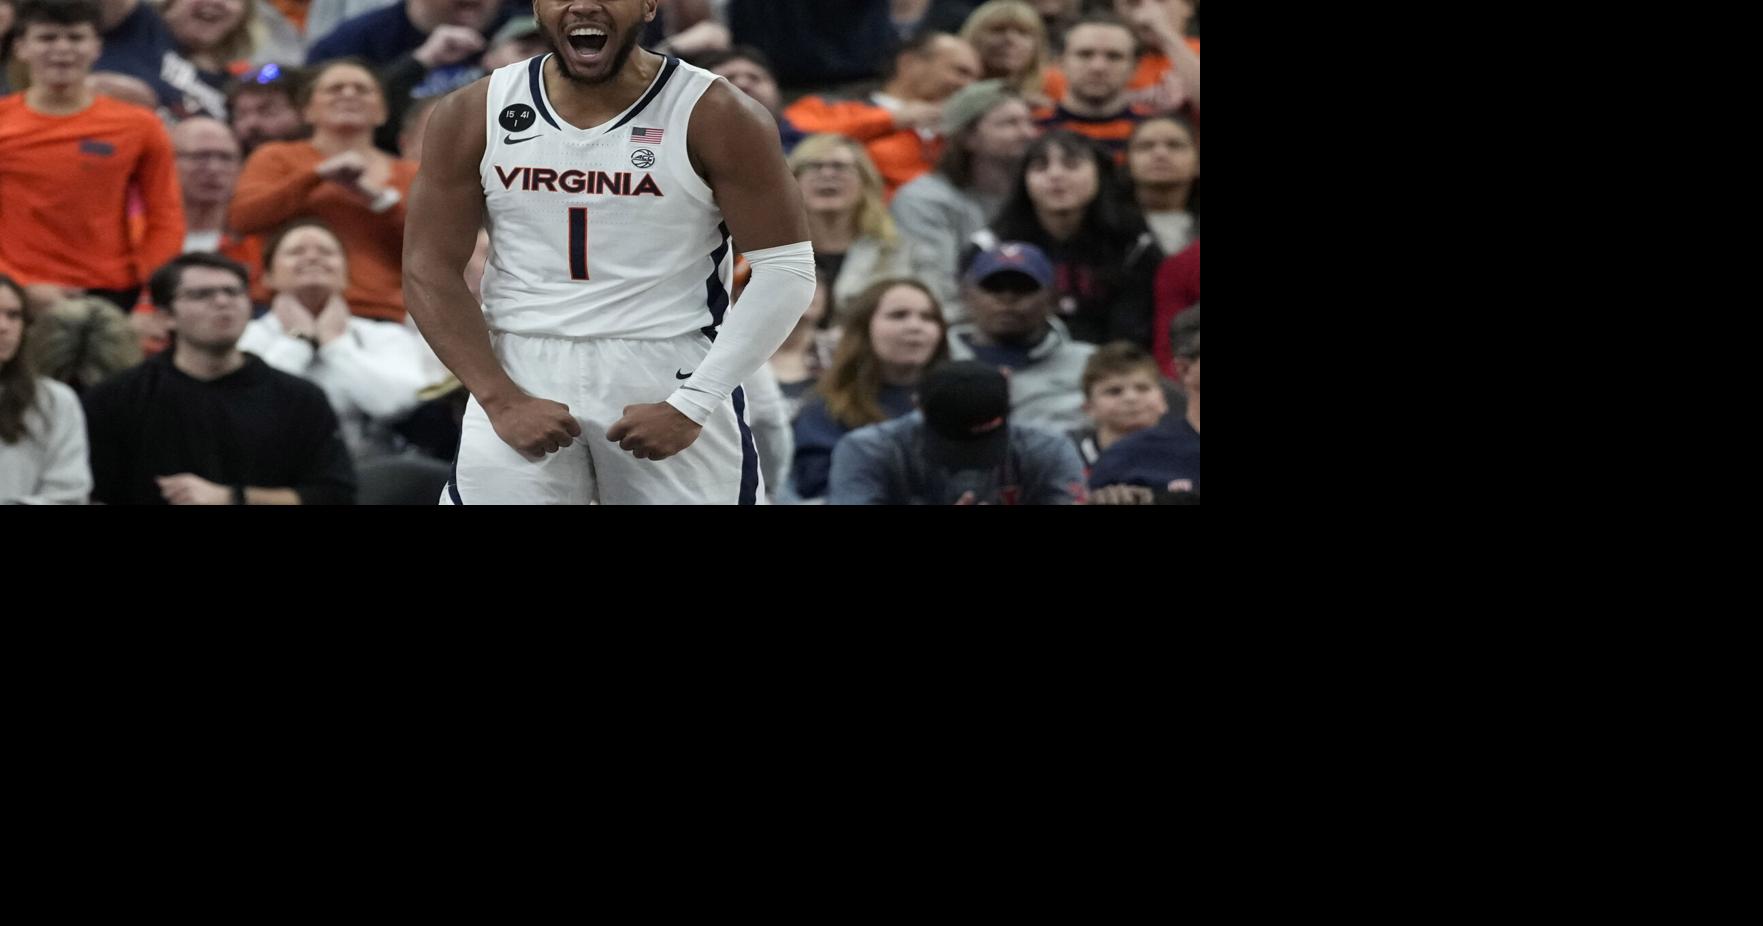 Barber: In Las Vegas win, Virginia's basketball team played for